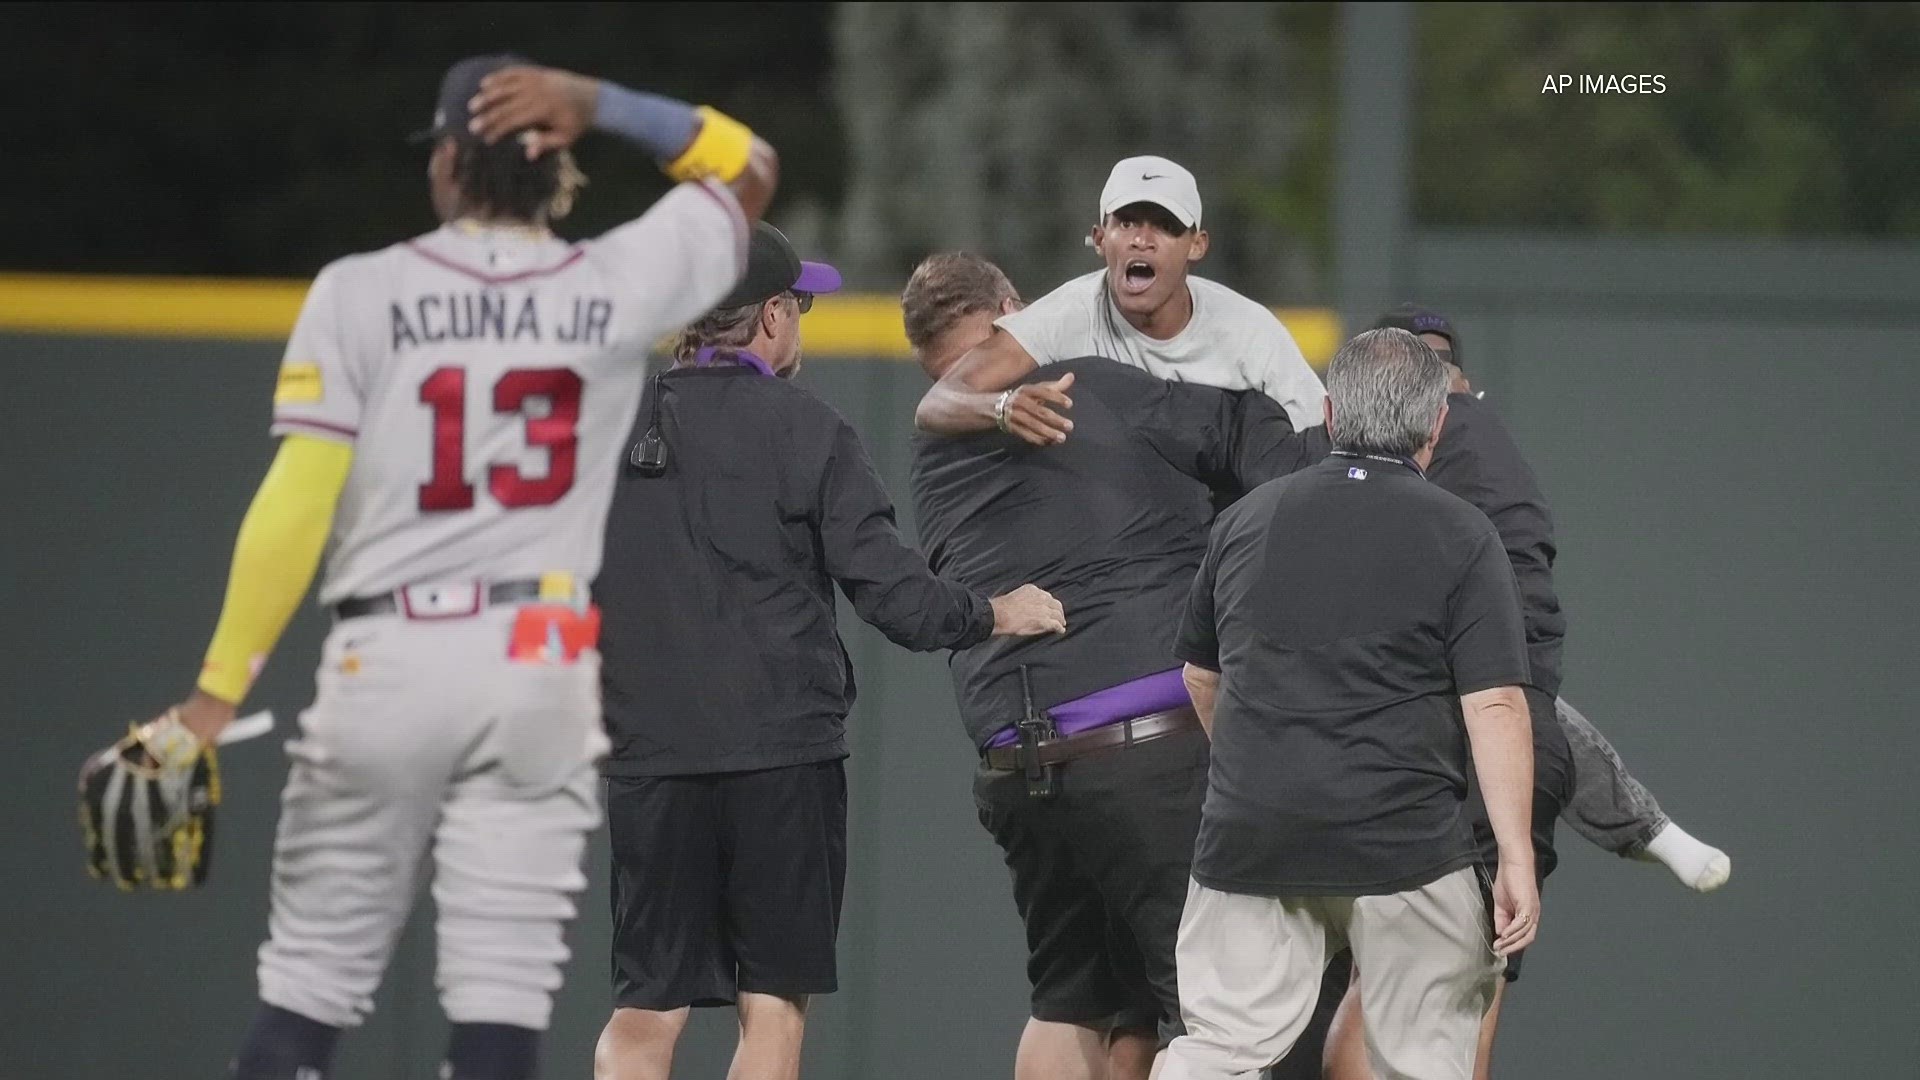 The Atlanta Braves’ game against the Colorado Rockies on Monday was delayed momentarily when two spectators ran onto the field.